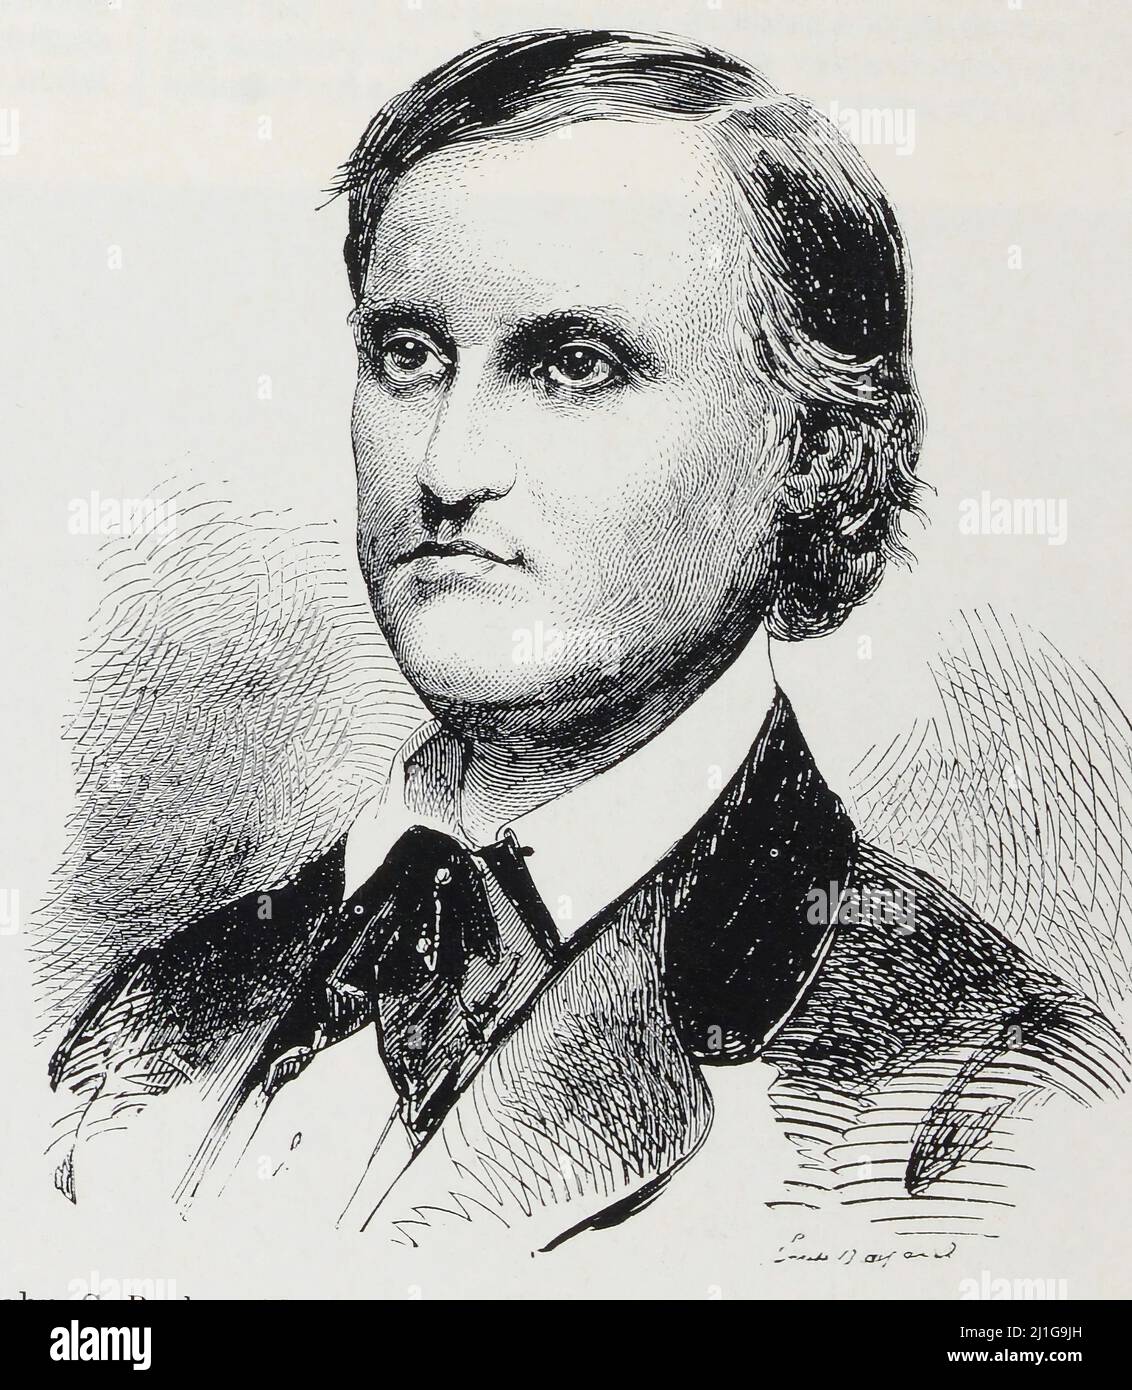 John C Brekenridge - (eng trad : Abraham Lincoln (of Illinois), Republican Party candidate   ) - Extract from "L'Illustration Journal Universel" - French illustrated magazine Stock Photo